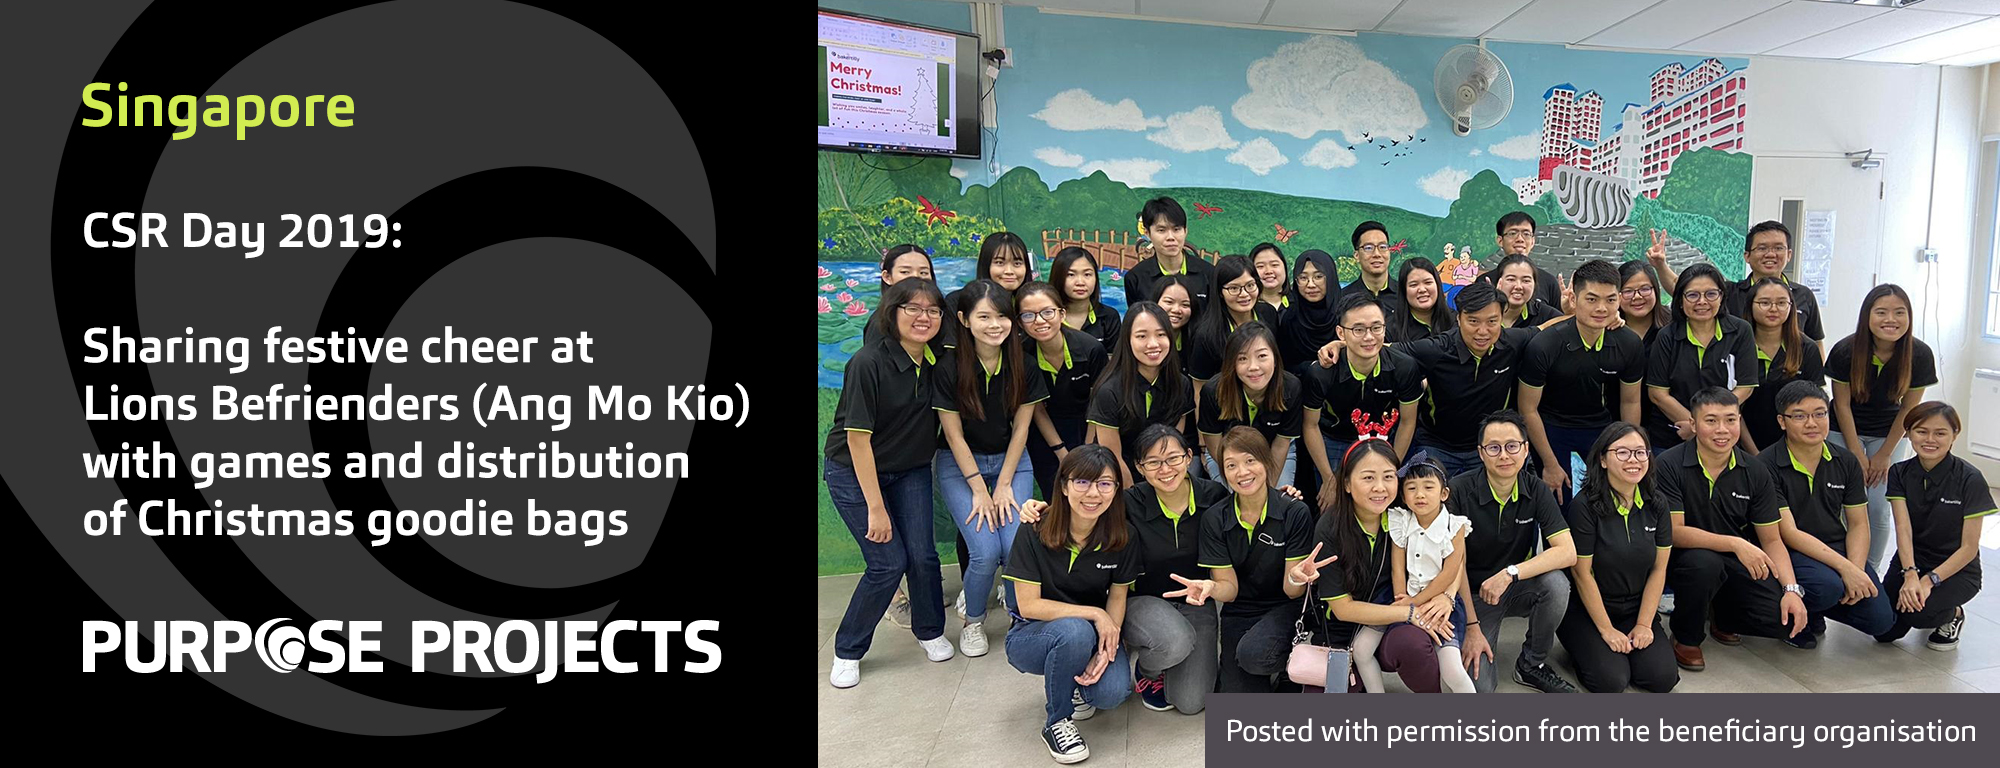 Baker Tilly Singapore CSR Day 2019_Purpose Projects_Lions Befrienders_Purpose Projects